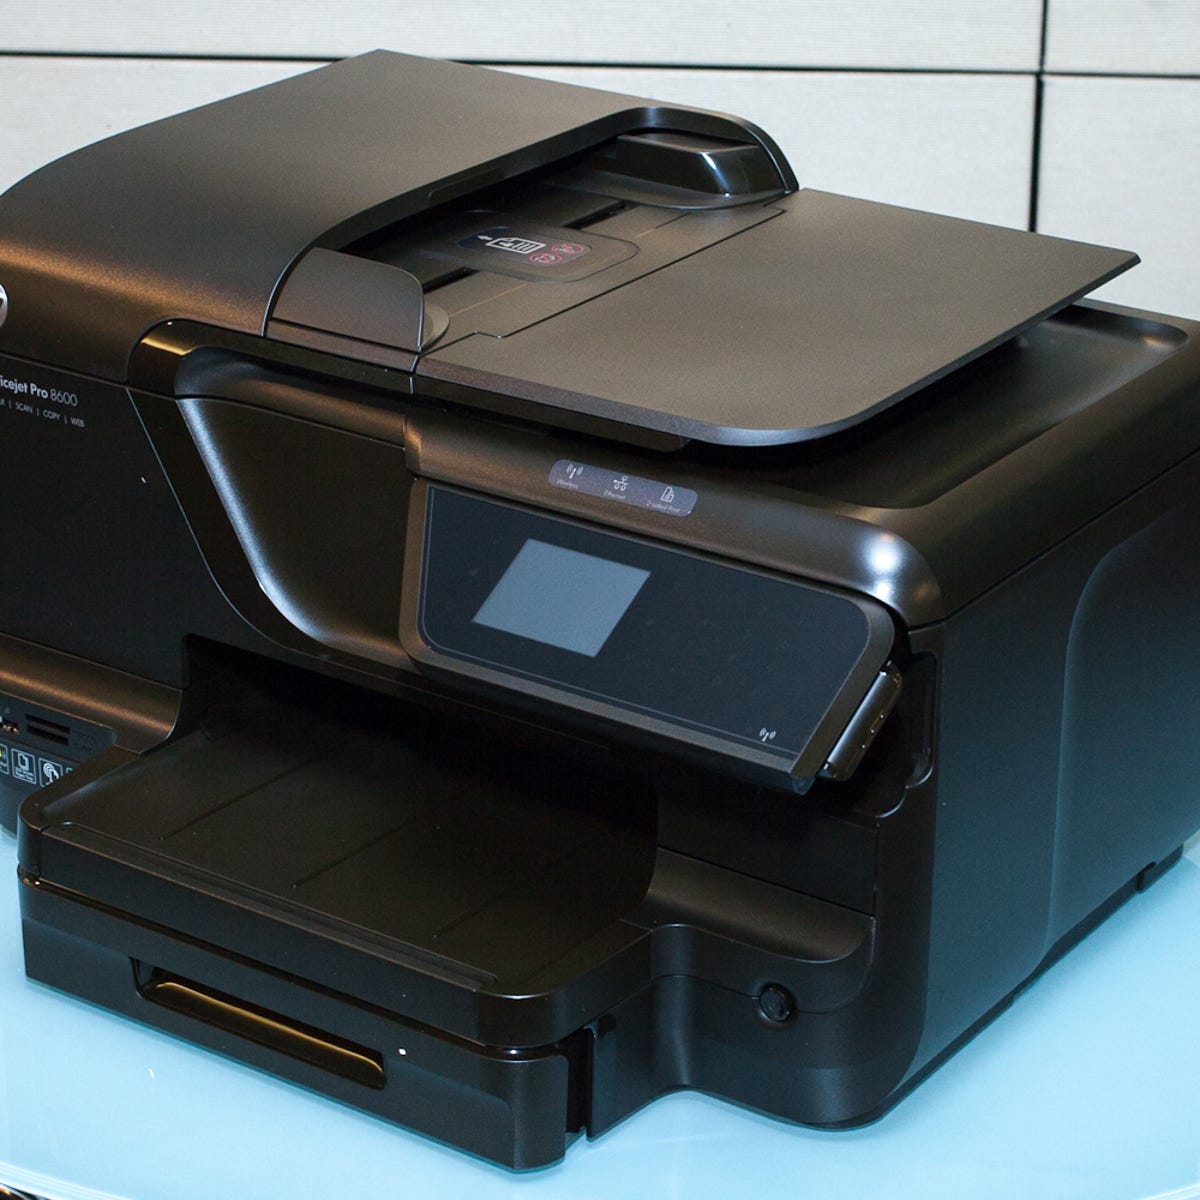 HP Pro 8600 e-All-in-One review: Officejet Pro 8600 e-All-in-One -